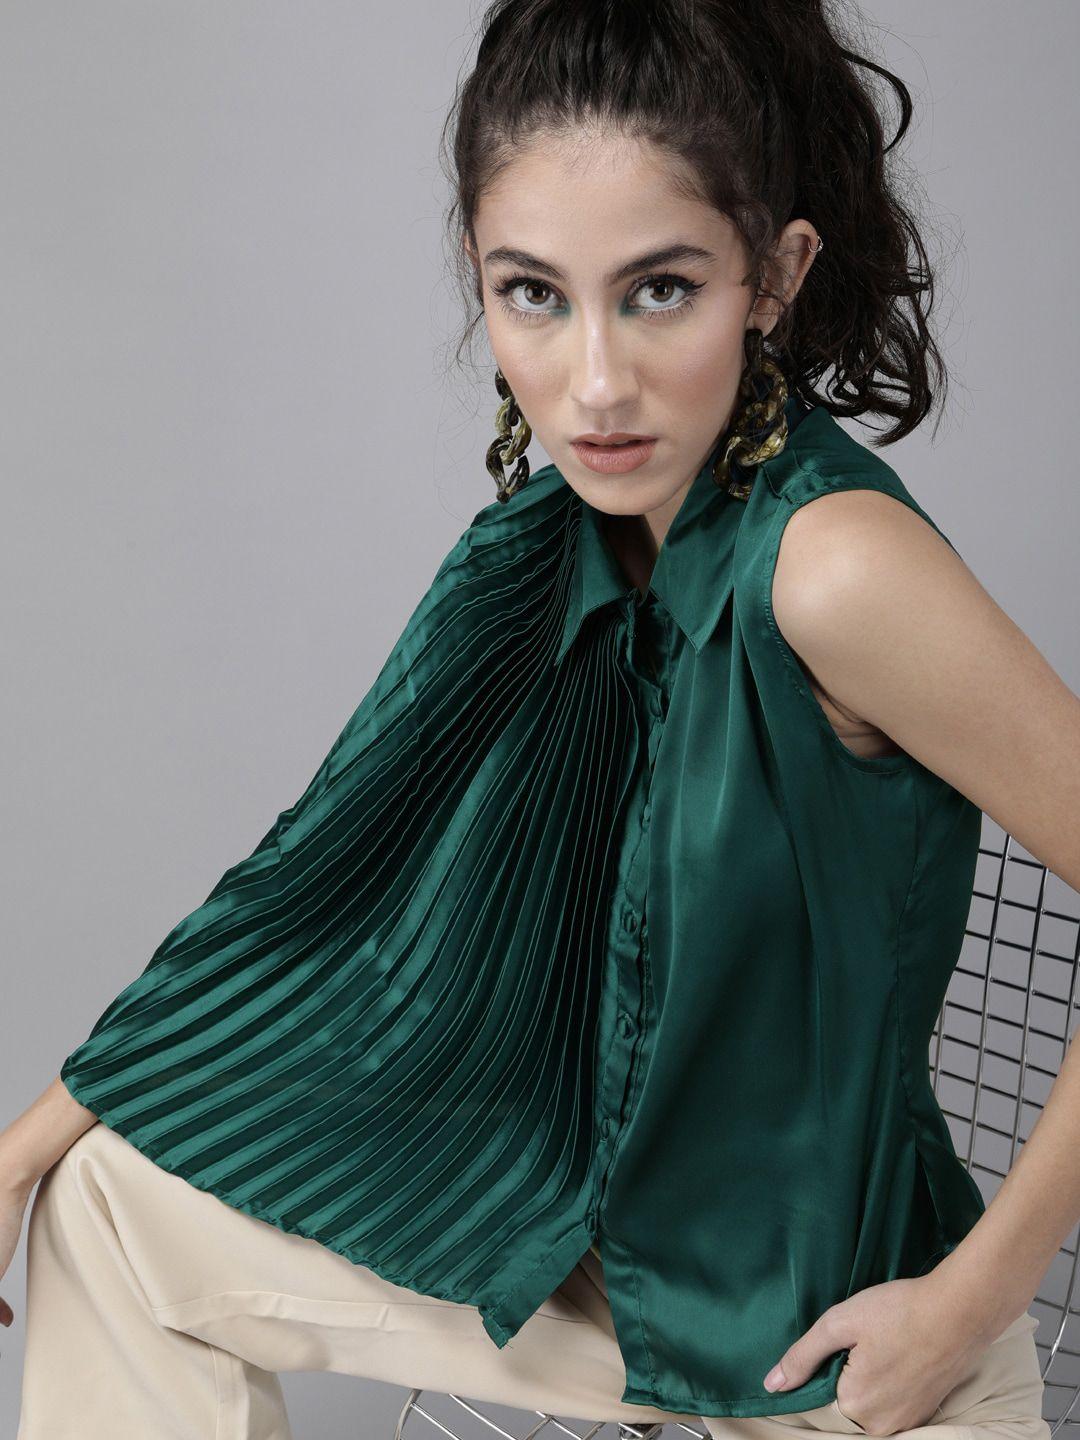 the dry state accordion pleats satin shirt style top